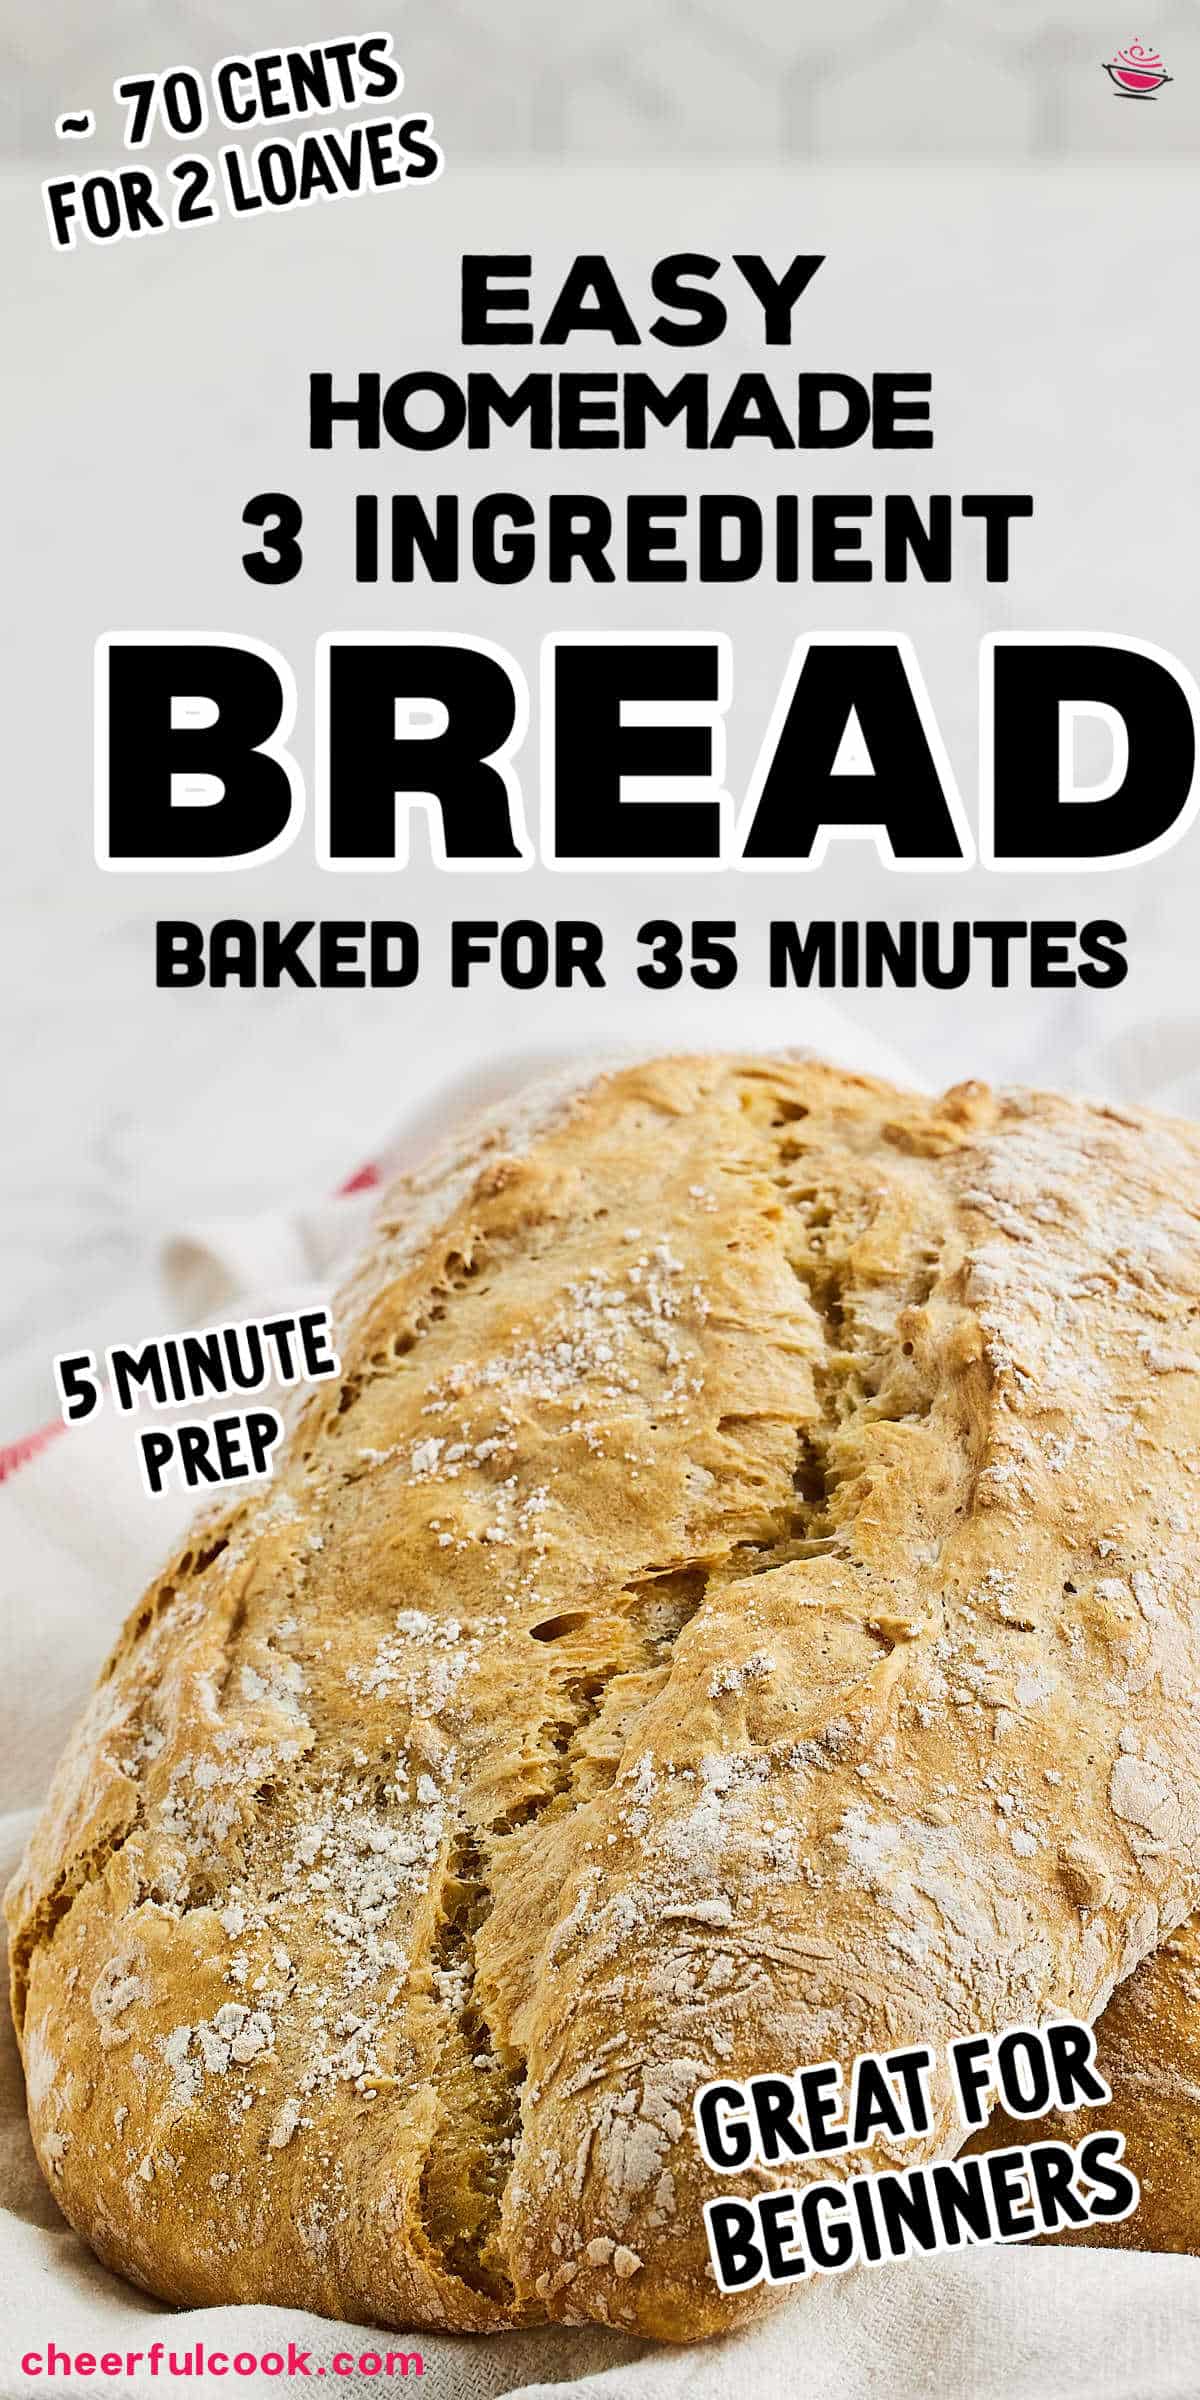 Do you want the secret to making heavenly homemade bread? You can make it yourself with just a few simple ingredients. So don't keep your taste buds waiting - get baking for an irresistibly crusty loaf of deliciousness! #cheerfulcook  #bread #homemadebread #recipehomemade  via @cheerfulcook